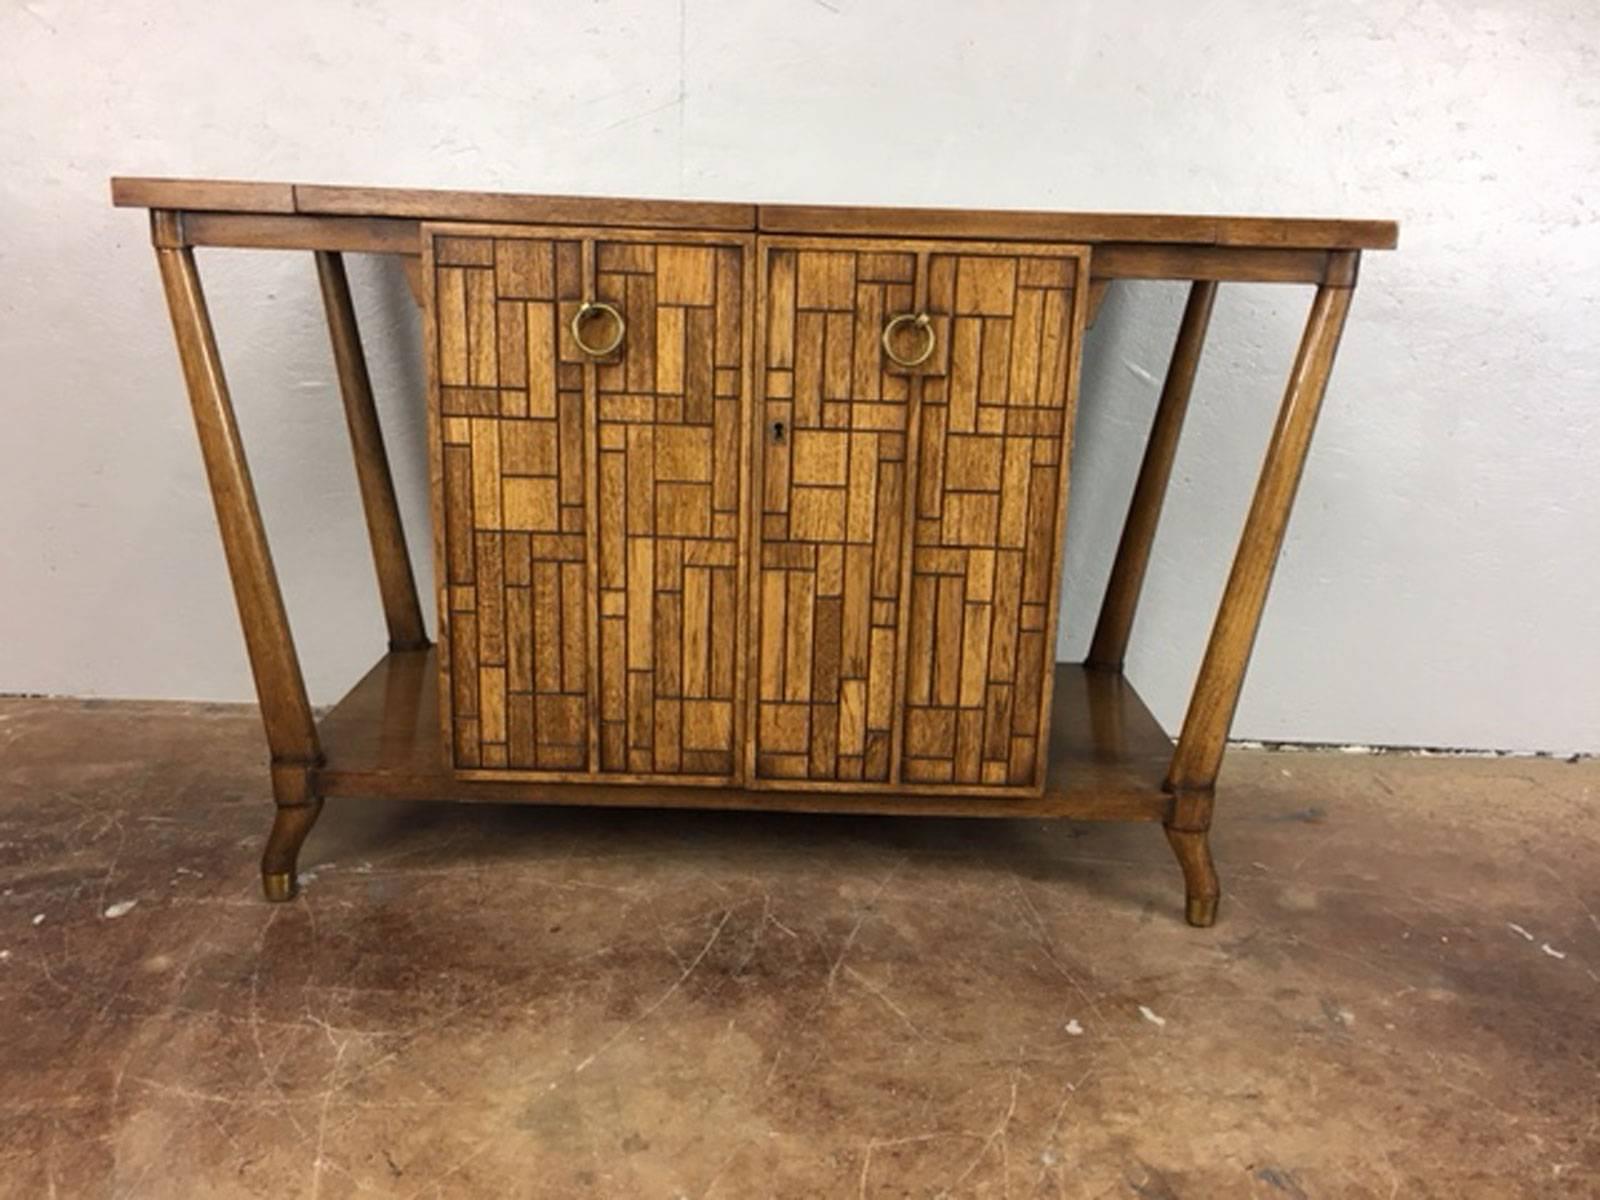 Beverage bar cart in walnut by Johnson Furniture Co. Both sides flip over for extended serving space. The width when not fully open is 42 inches.